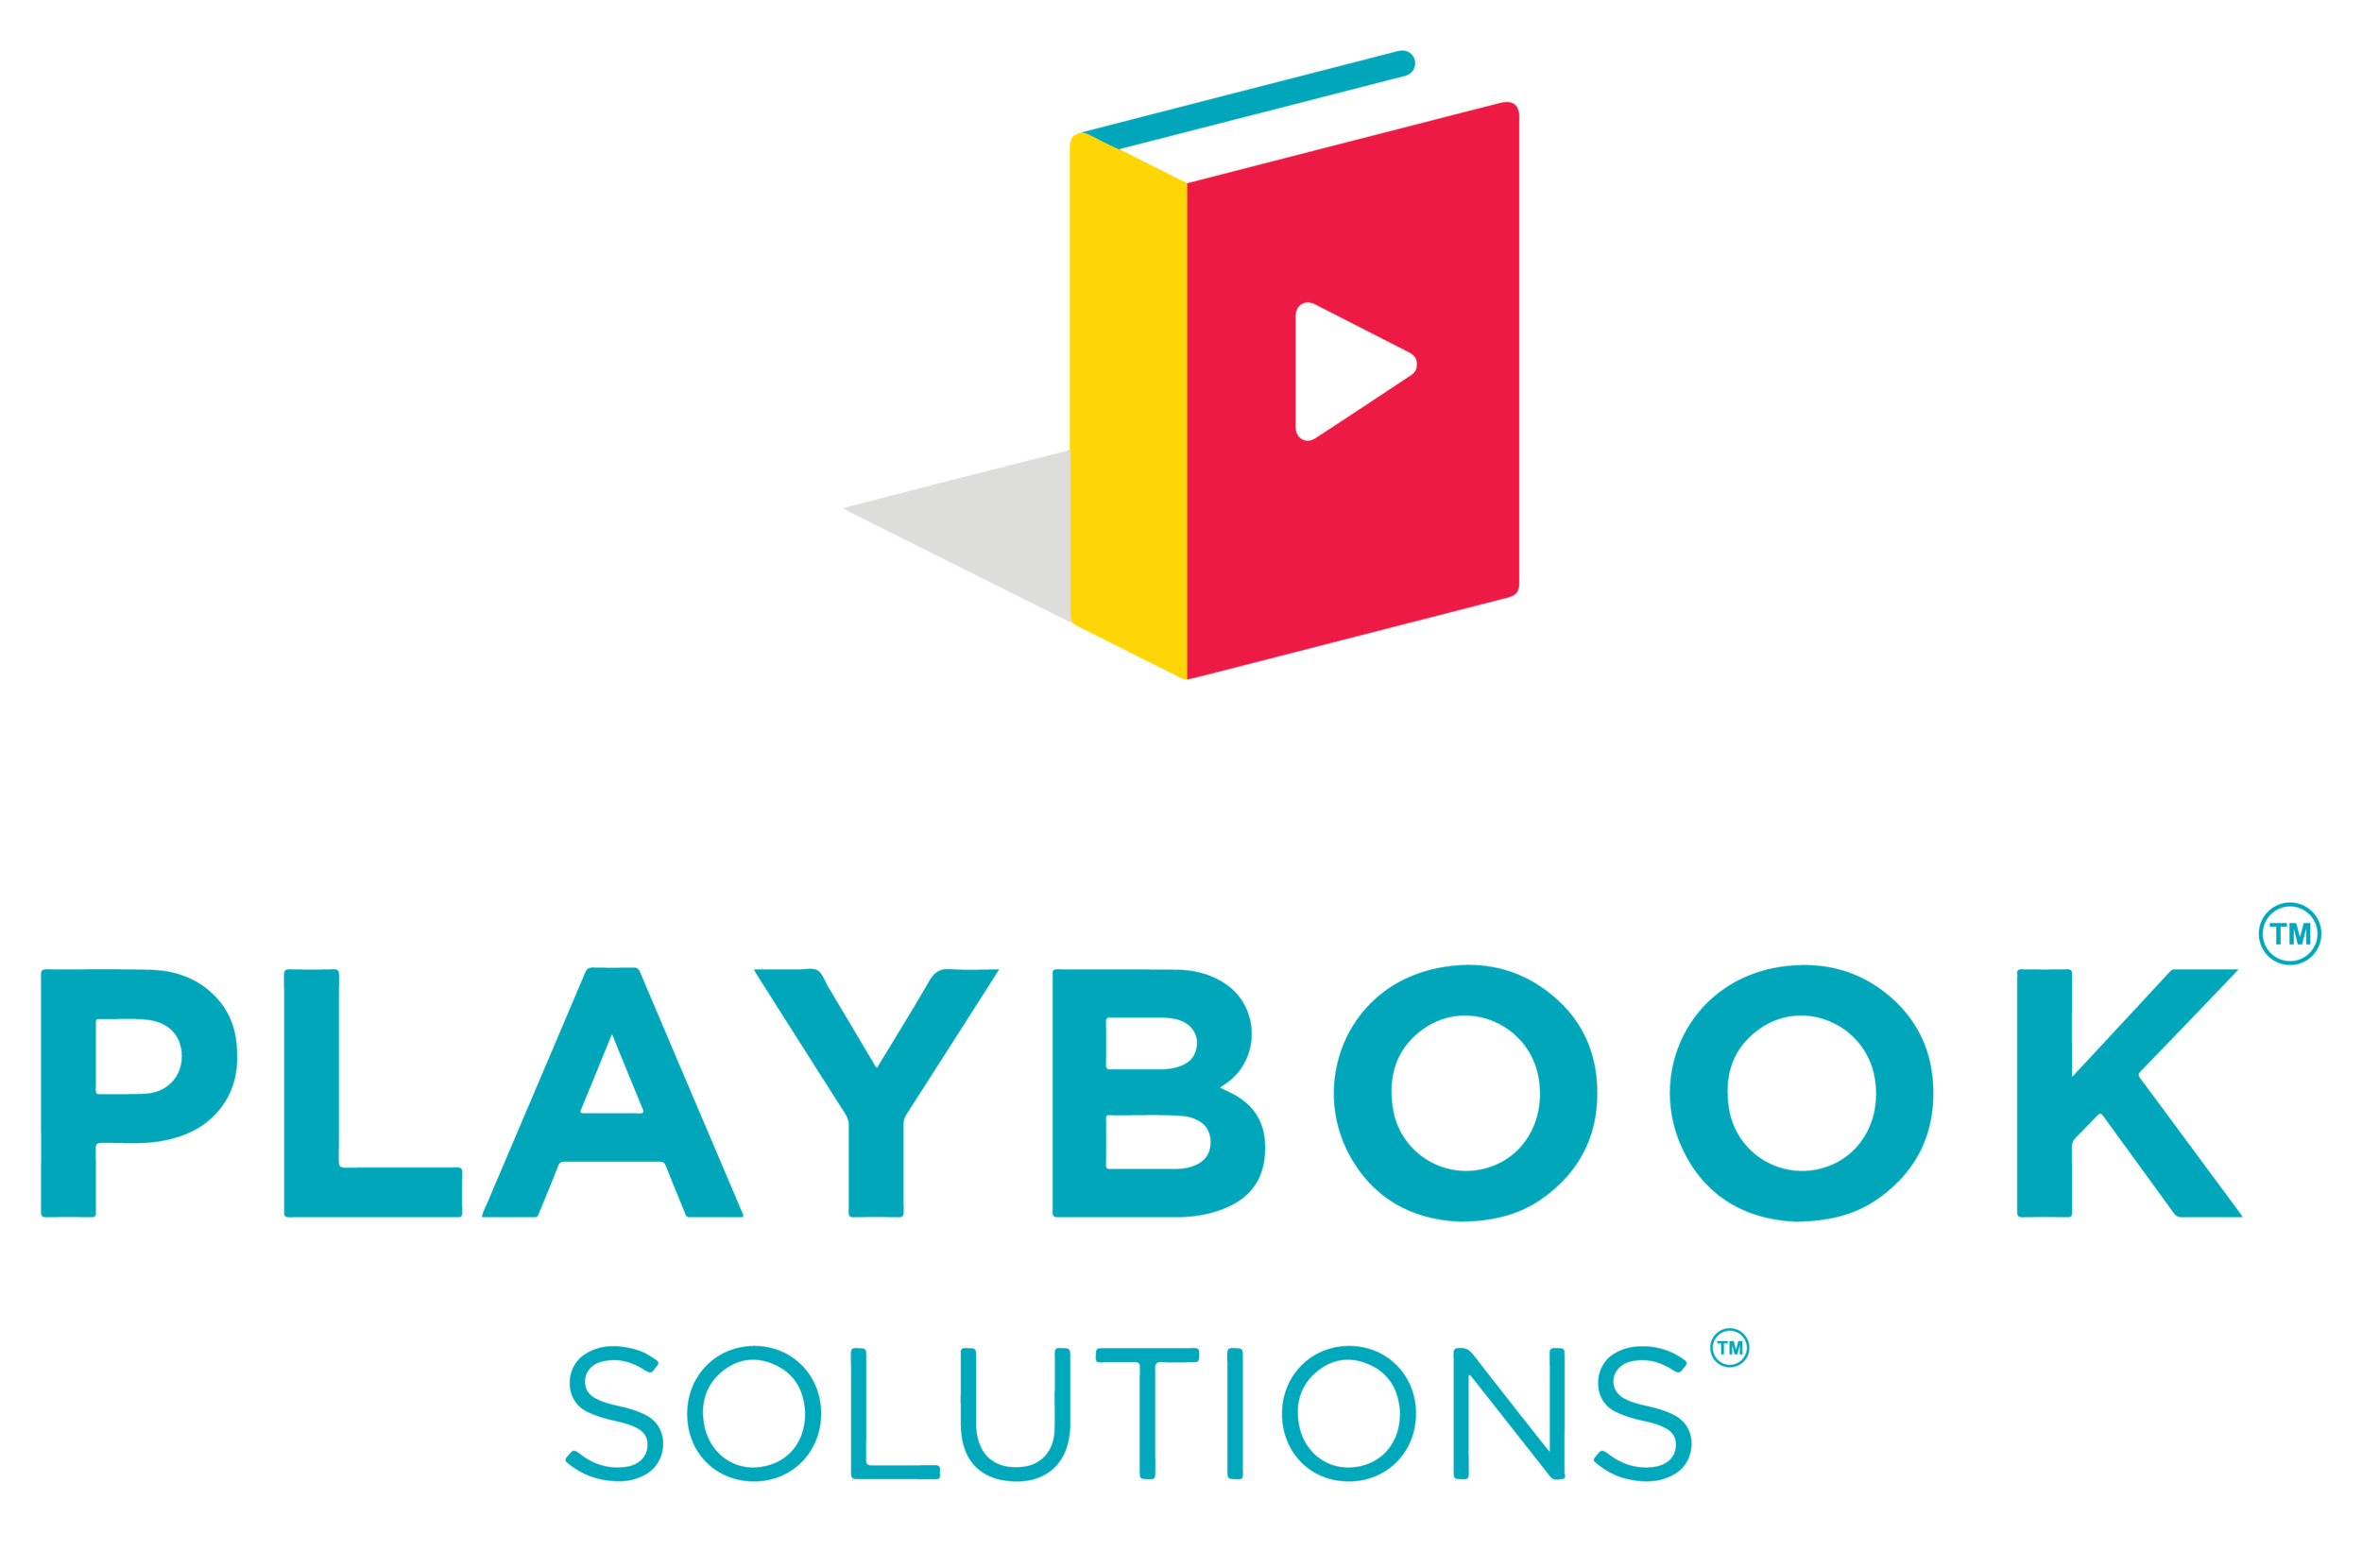 Playbook Solutions